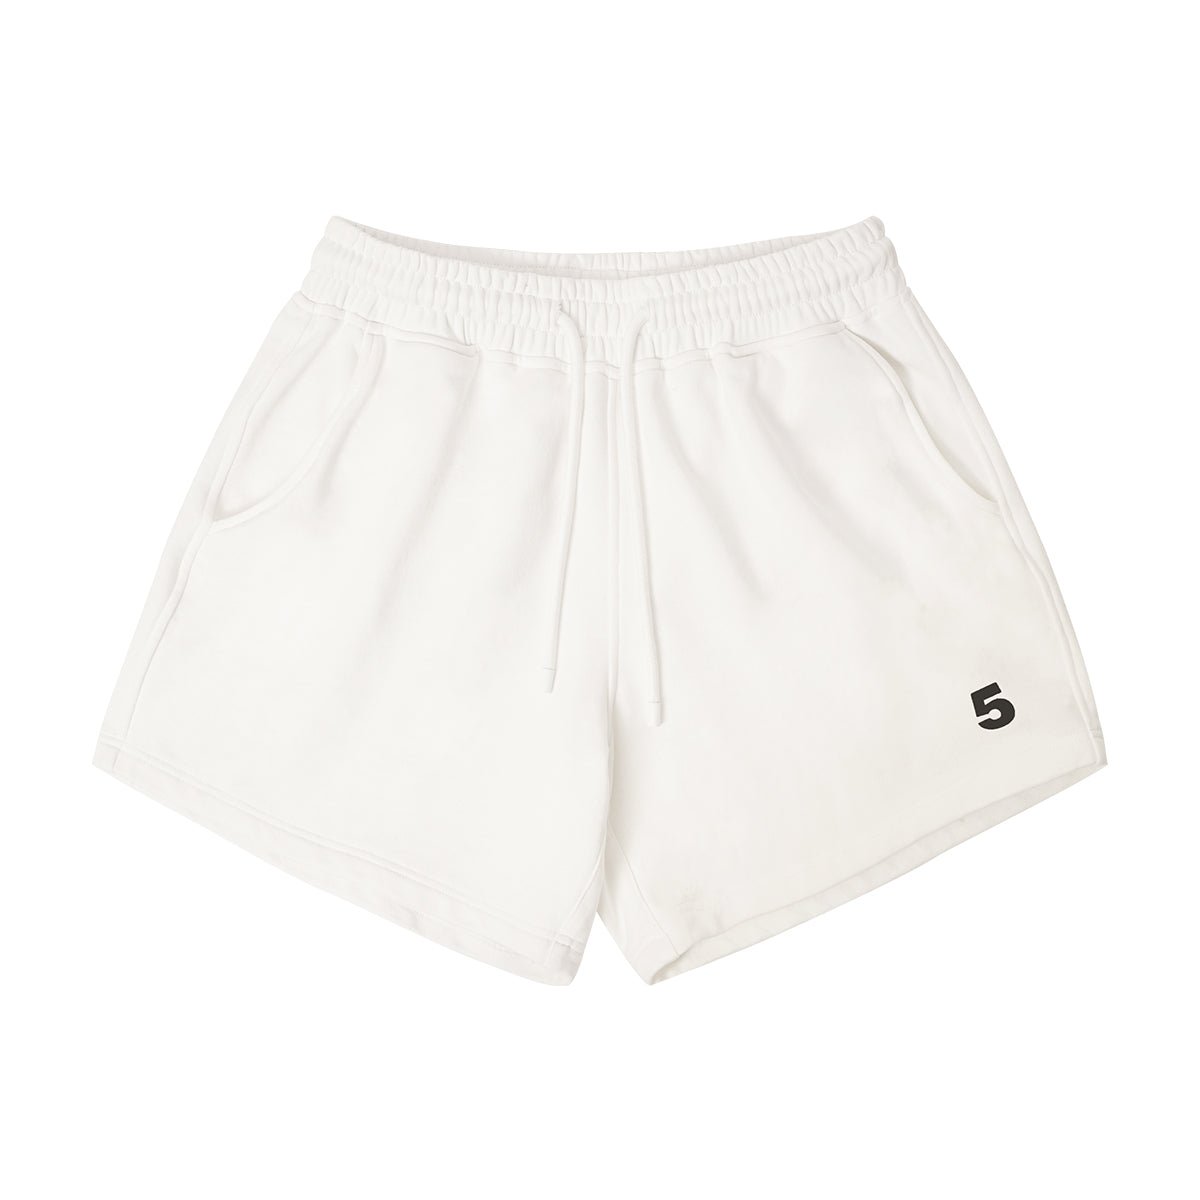 Special 5 Relaxed White Cotton Shorts - 0cm